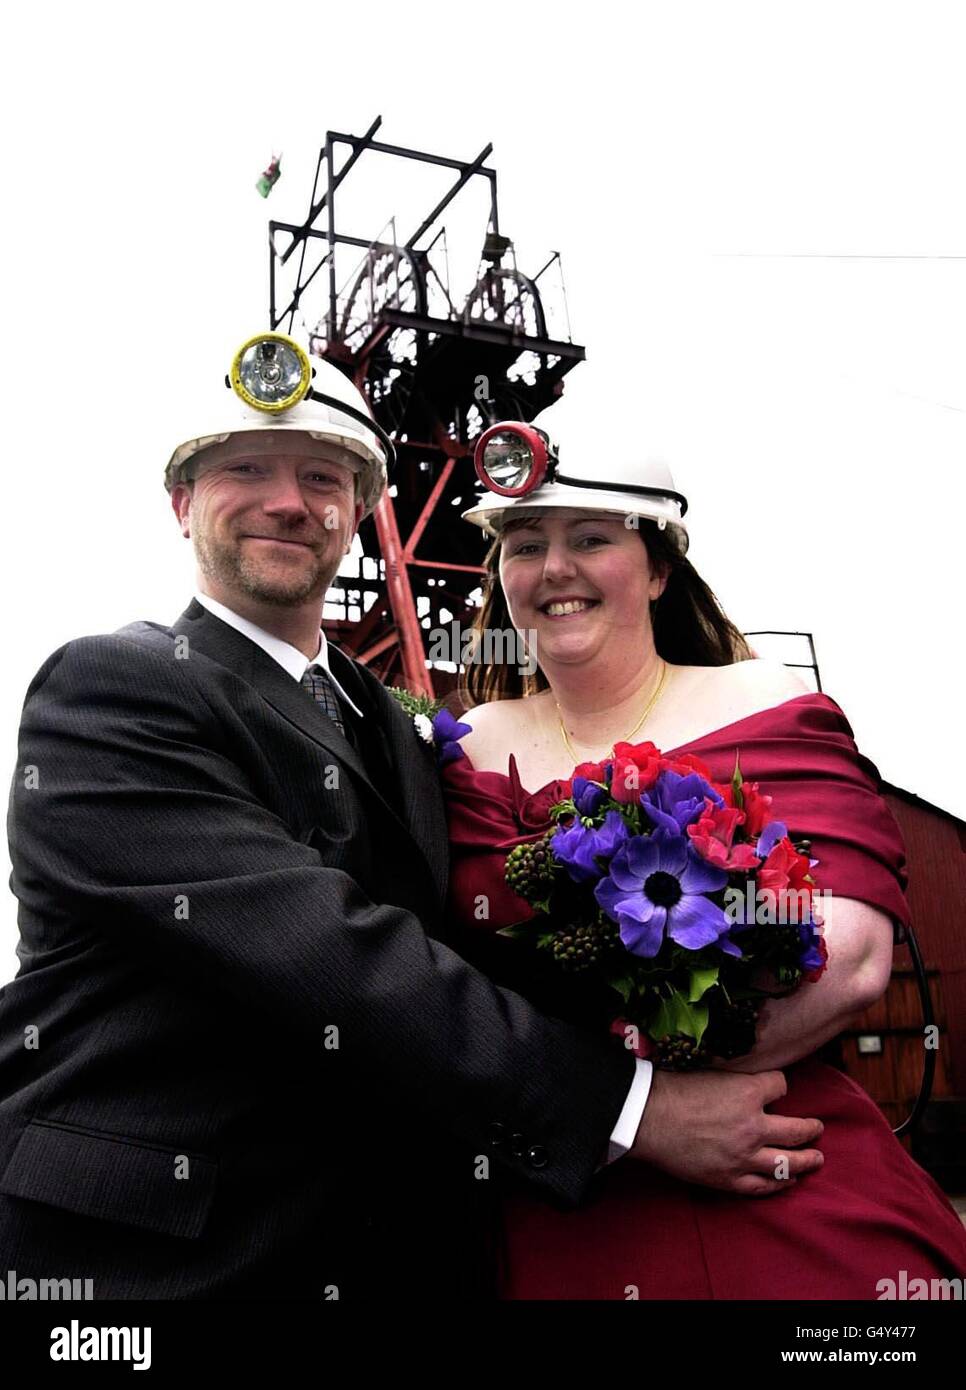 Christina Golledge, 35, and Mark Lee, 39, from Milton Keynes, who are due to be married at the Big Pit Mining Museum, in Blaenavon, South Wales. The couple decided to choose something different by tying the knot 300ft underground in a former coal mine. * For the unusual occasion, Miss Golledge's burgundy dress and Mr Lee's suit are topped by hard hats and lights with gas masks in case of emergencies. Stock Photo